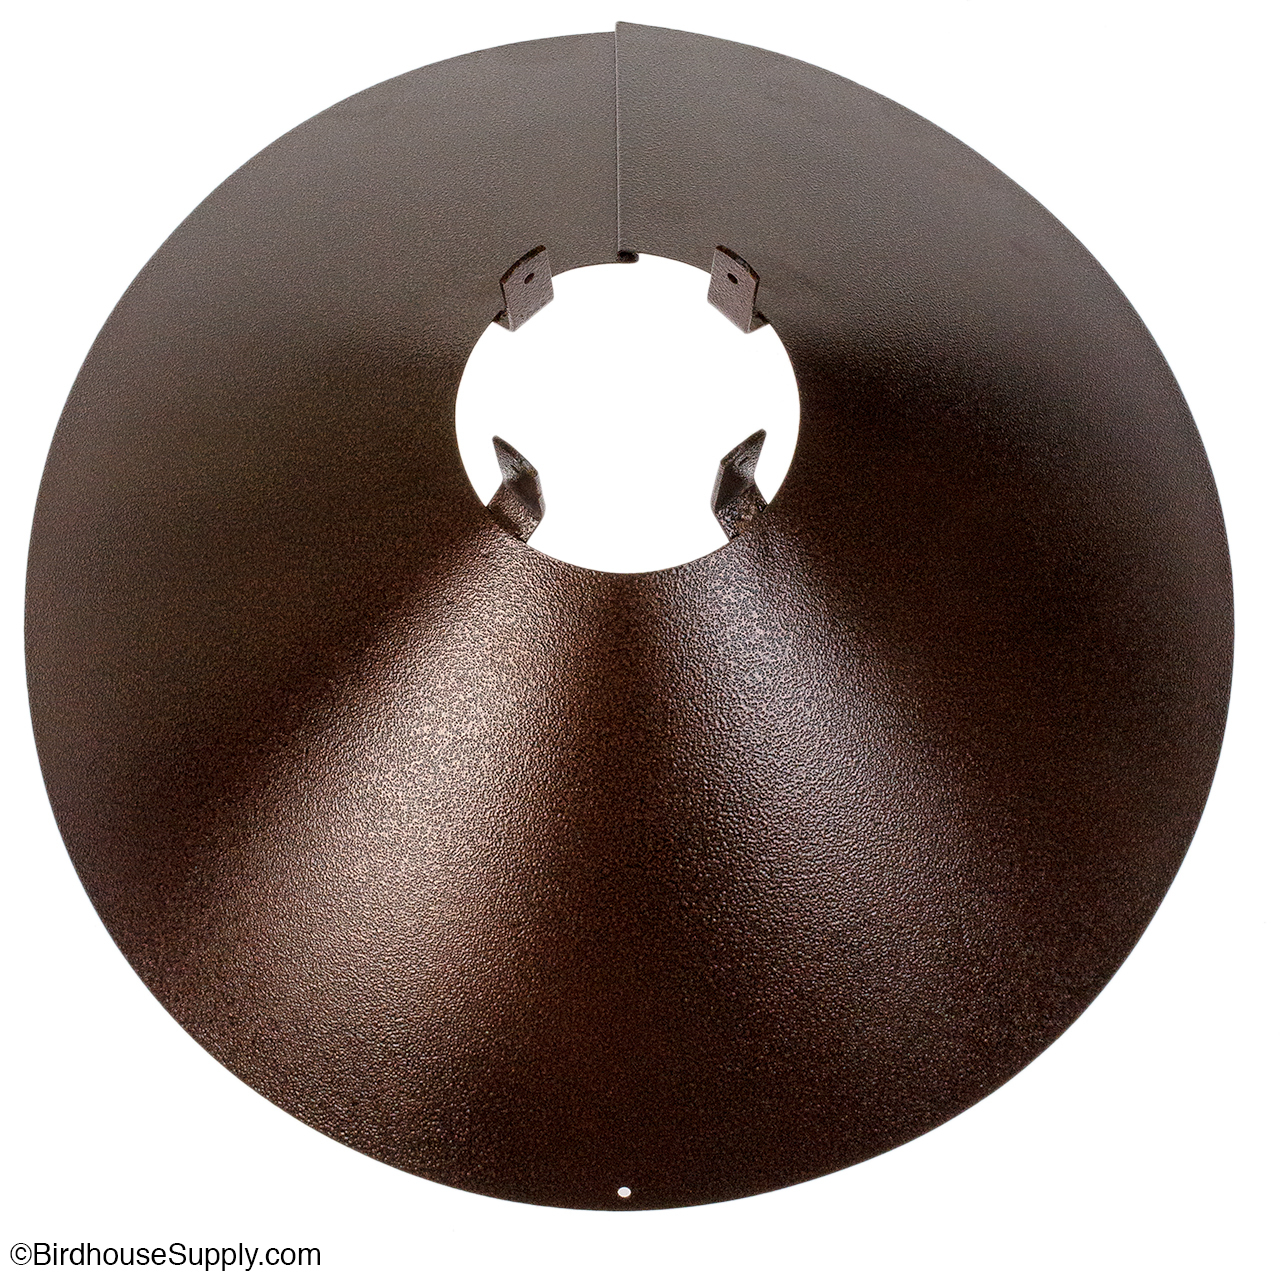 Post Mount Squirrel Baffle at